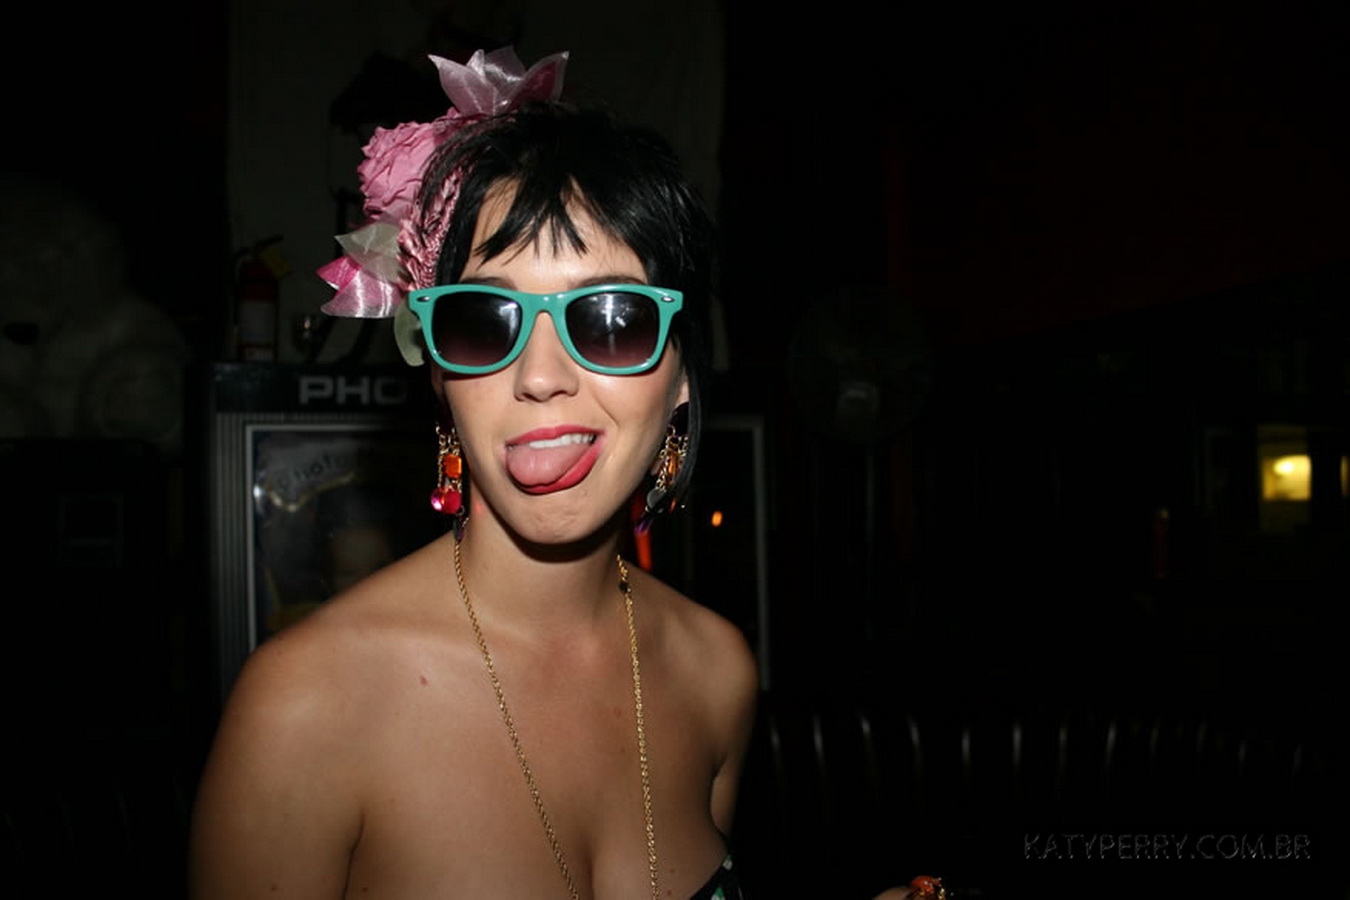 Katy_Perry_bobsslip_drunk_cleavage_downblouse_upskirt_nipslip_at_her_birthday_2007_party_99x_HQ_12.jpg